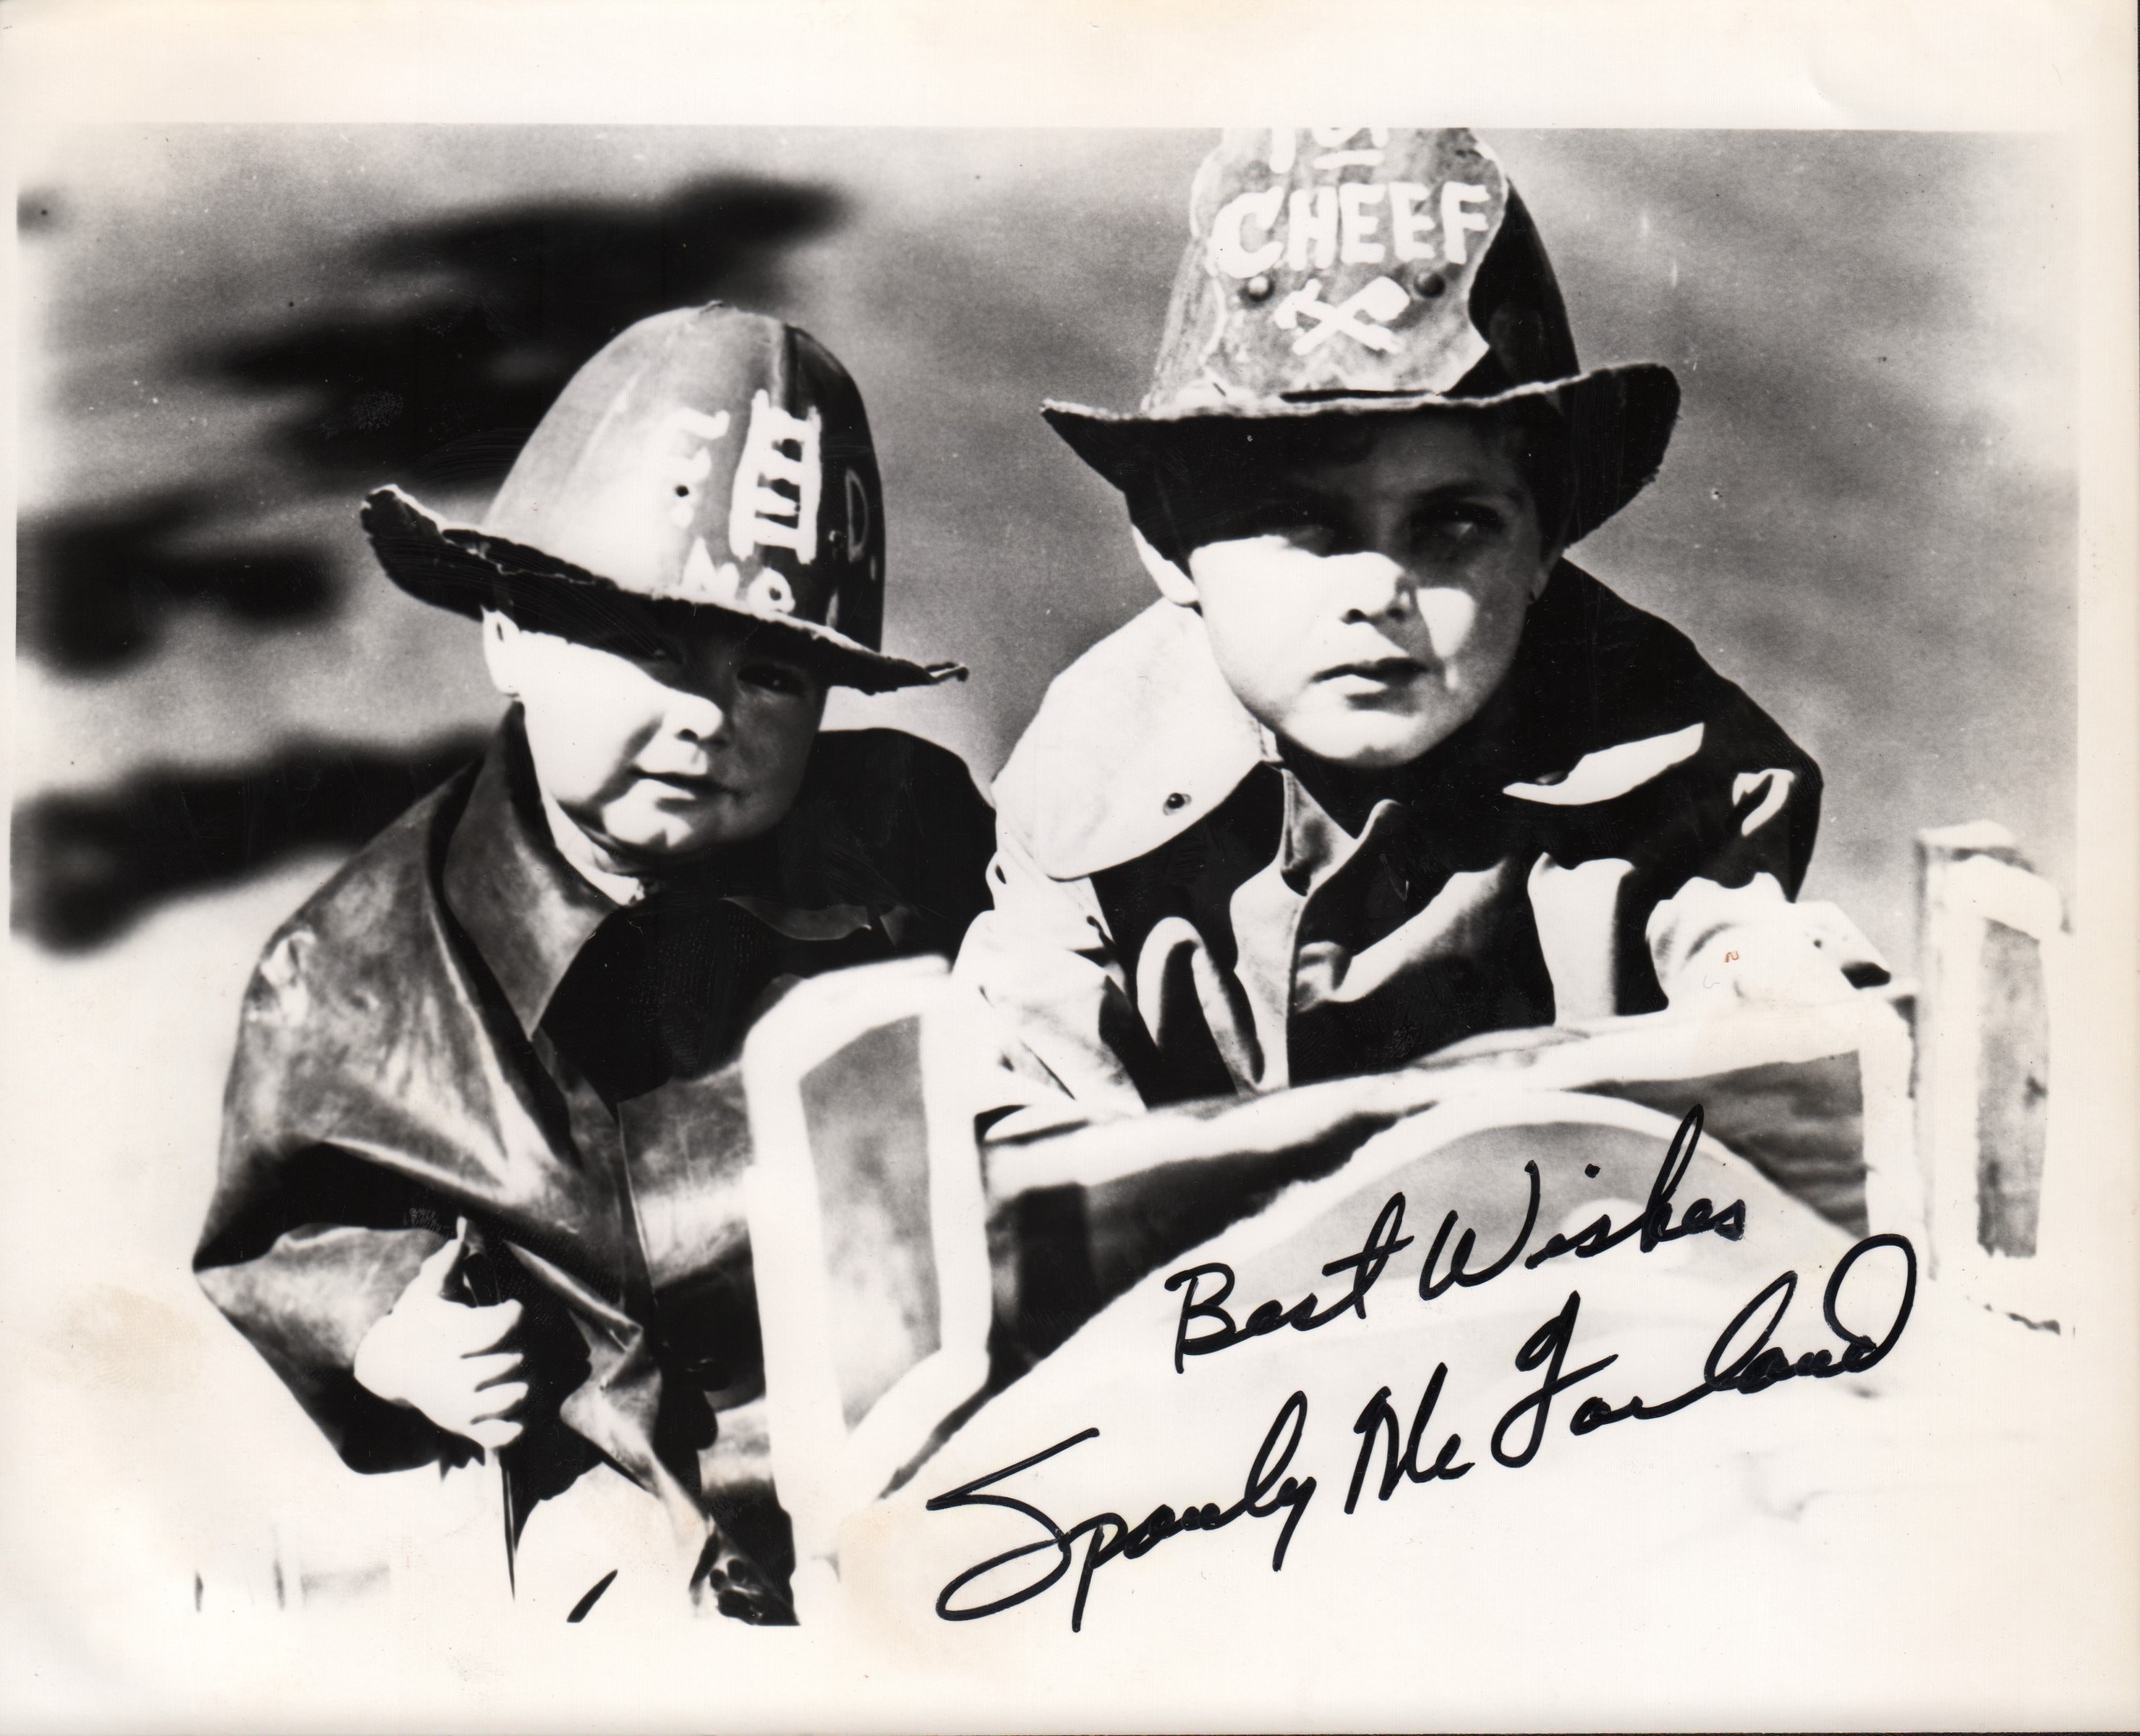 Our Gang's Spanky McFarland Signed Photo (PSA/DNA)